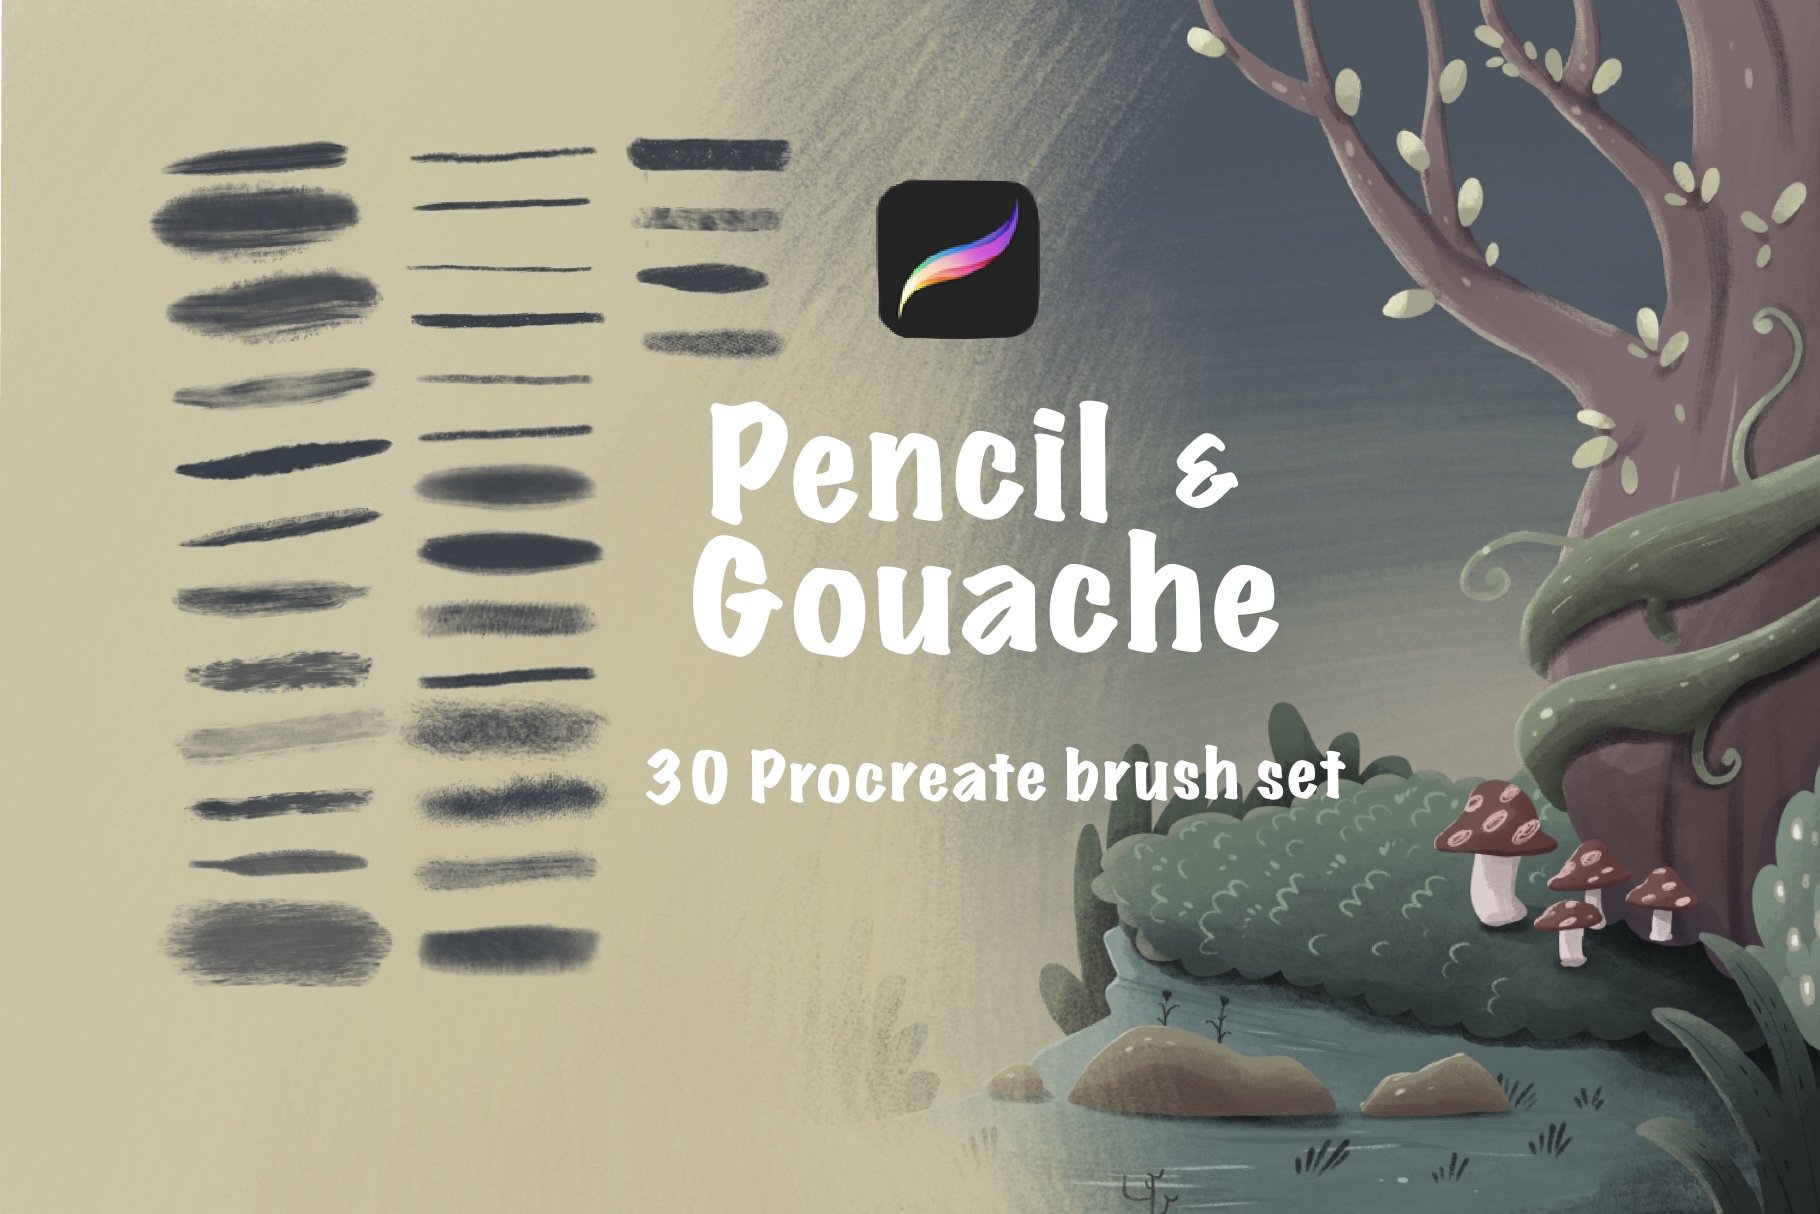 Pencil and Gouache Procreate Brush cover image.